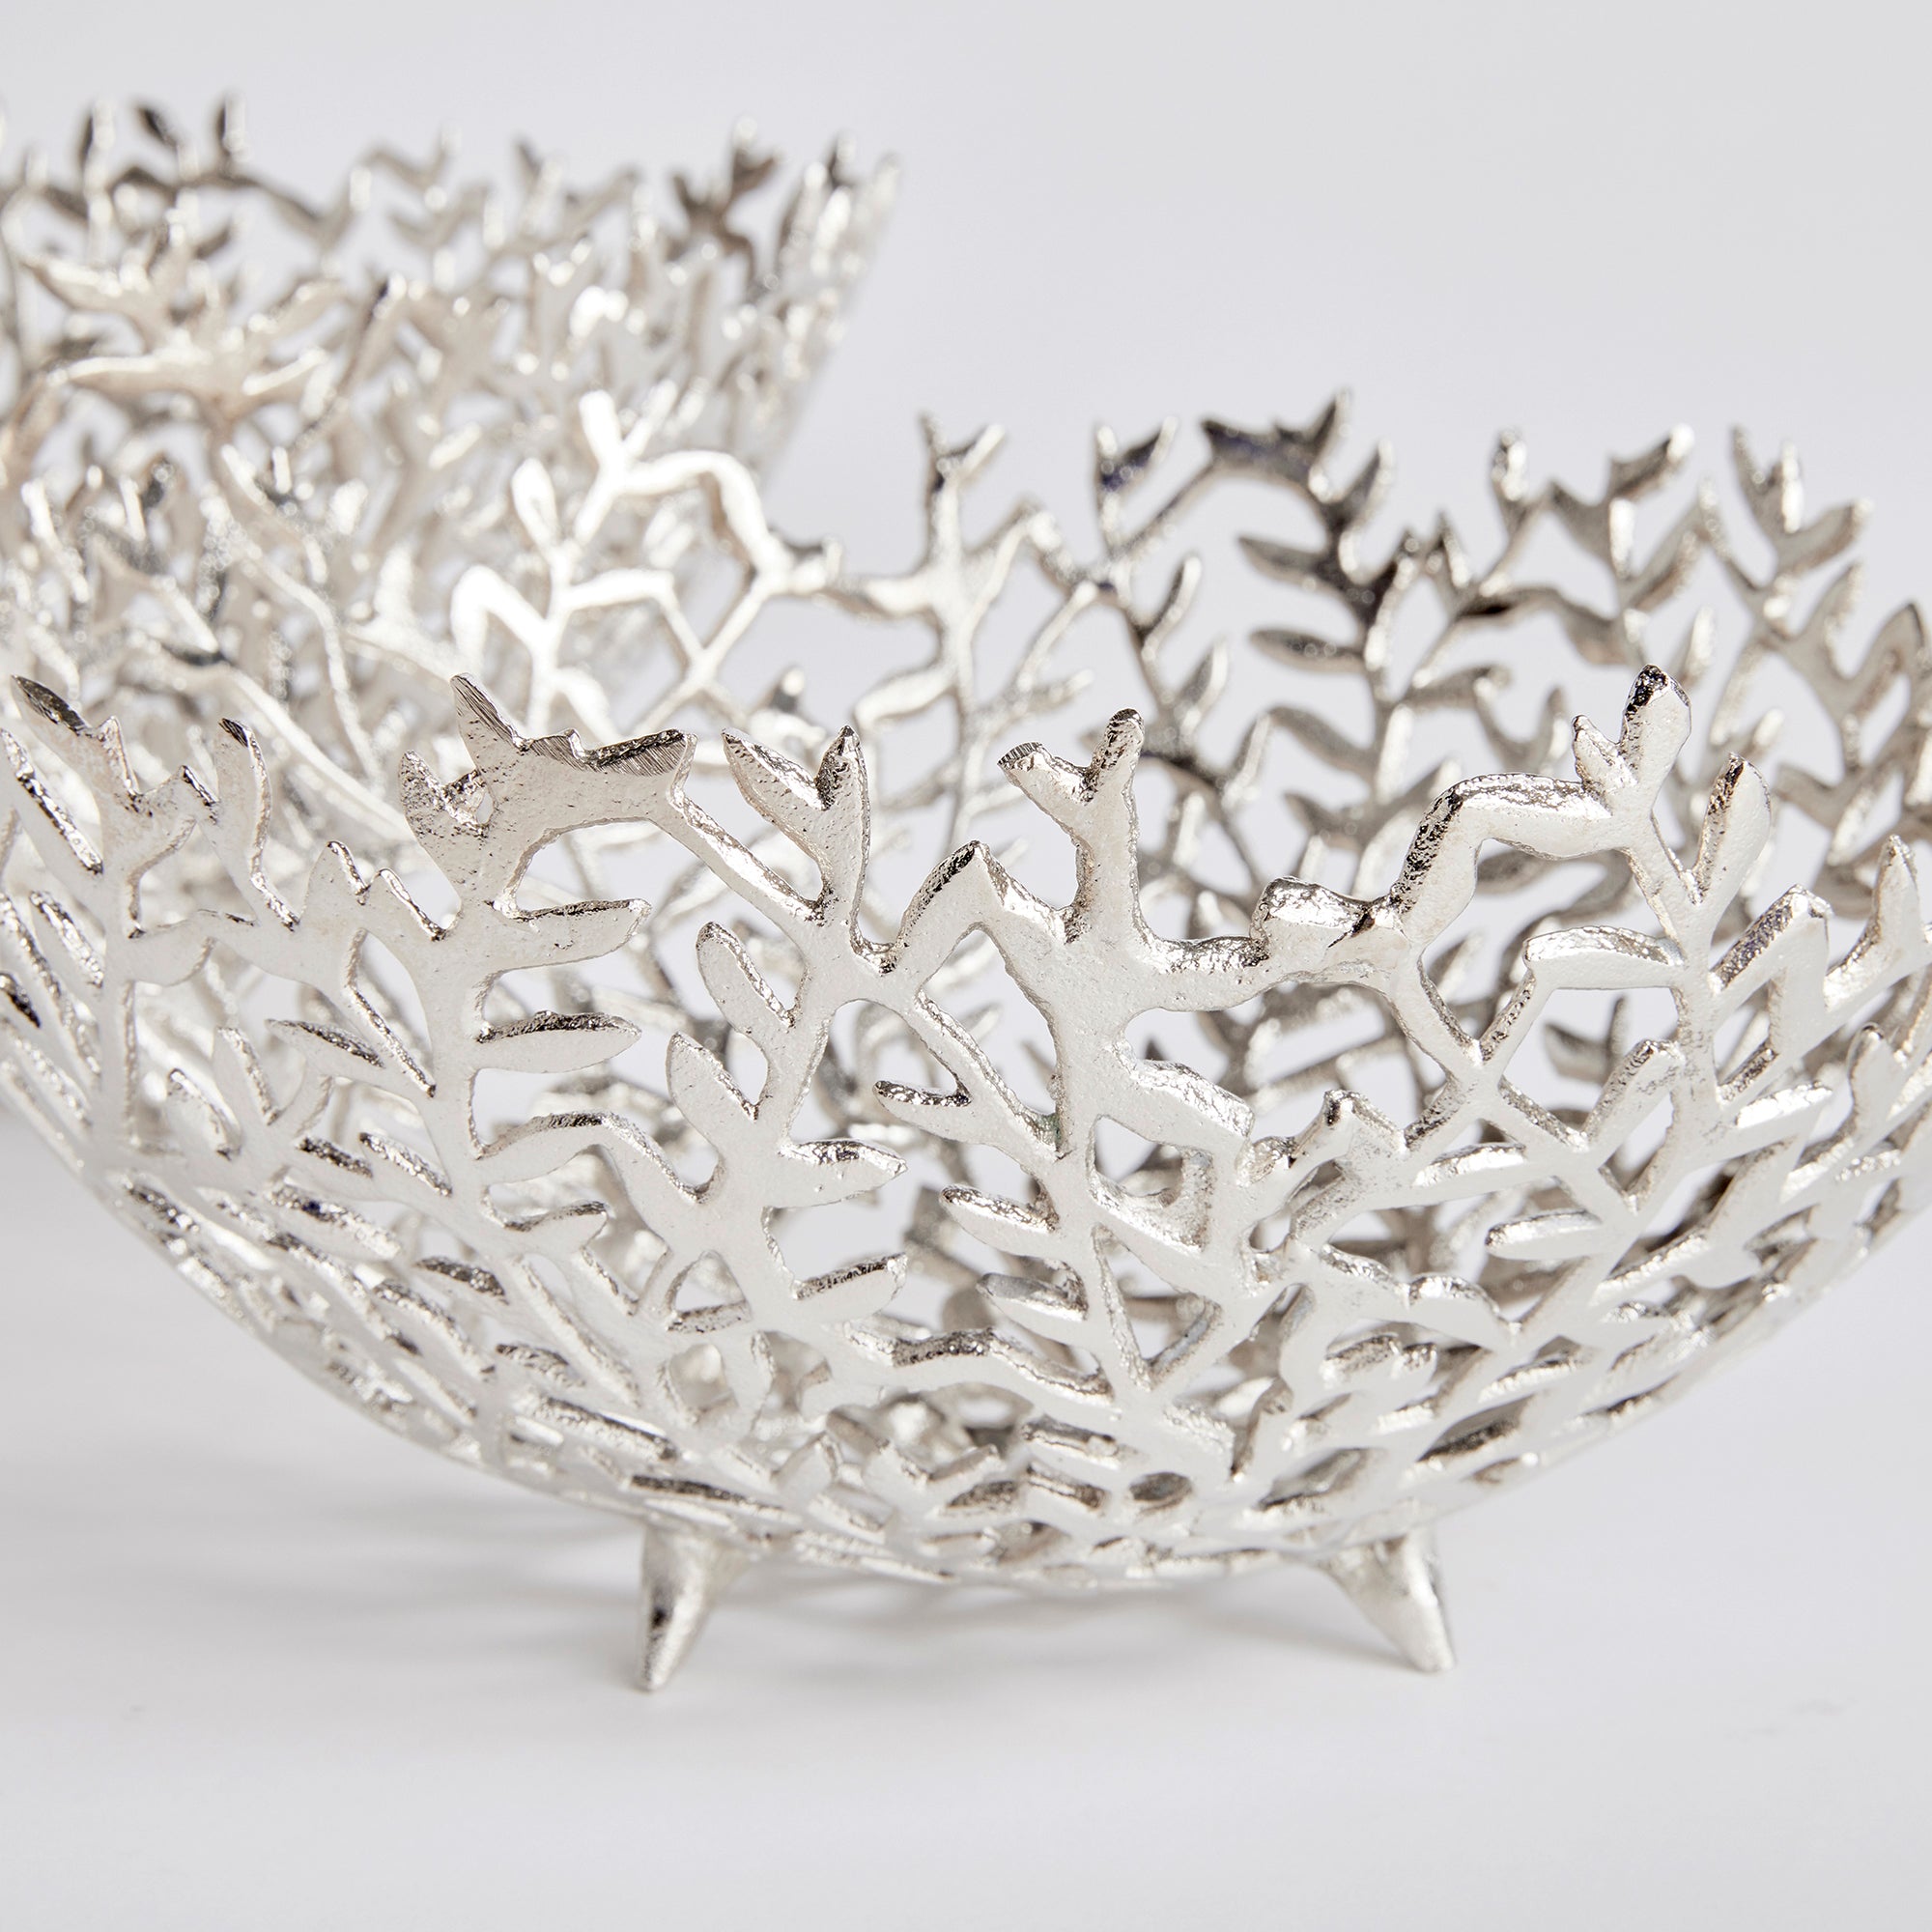 Light flowing vines make up the composition of this pair of silver decorative bowls. Fill with natural green orbs, or display as is for a clean, sophisticated look. Amethyst Home provides interior design, new construction, custom furniture, and area rugs in the Scottsdale metro area.